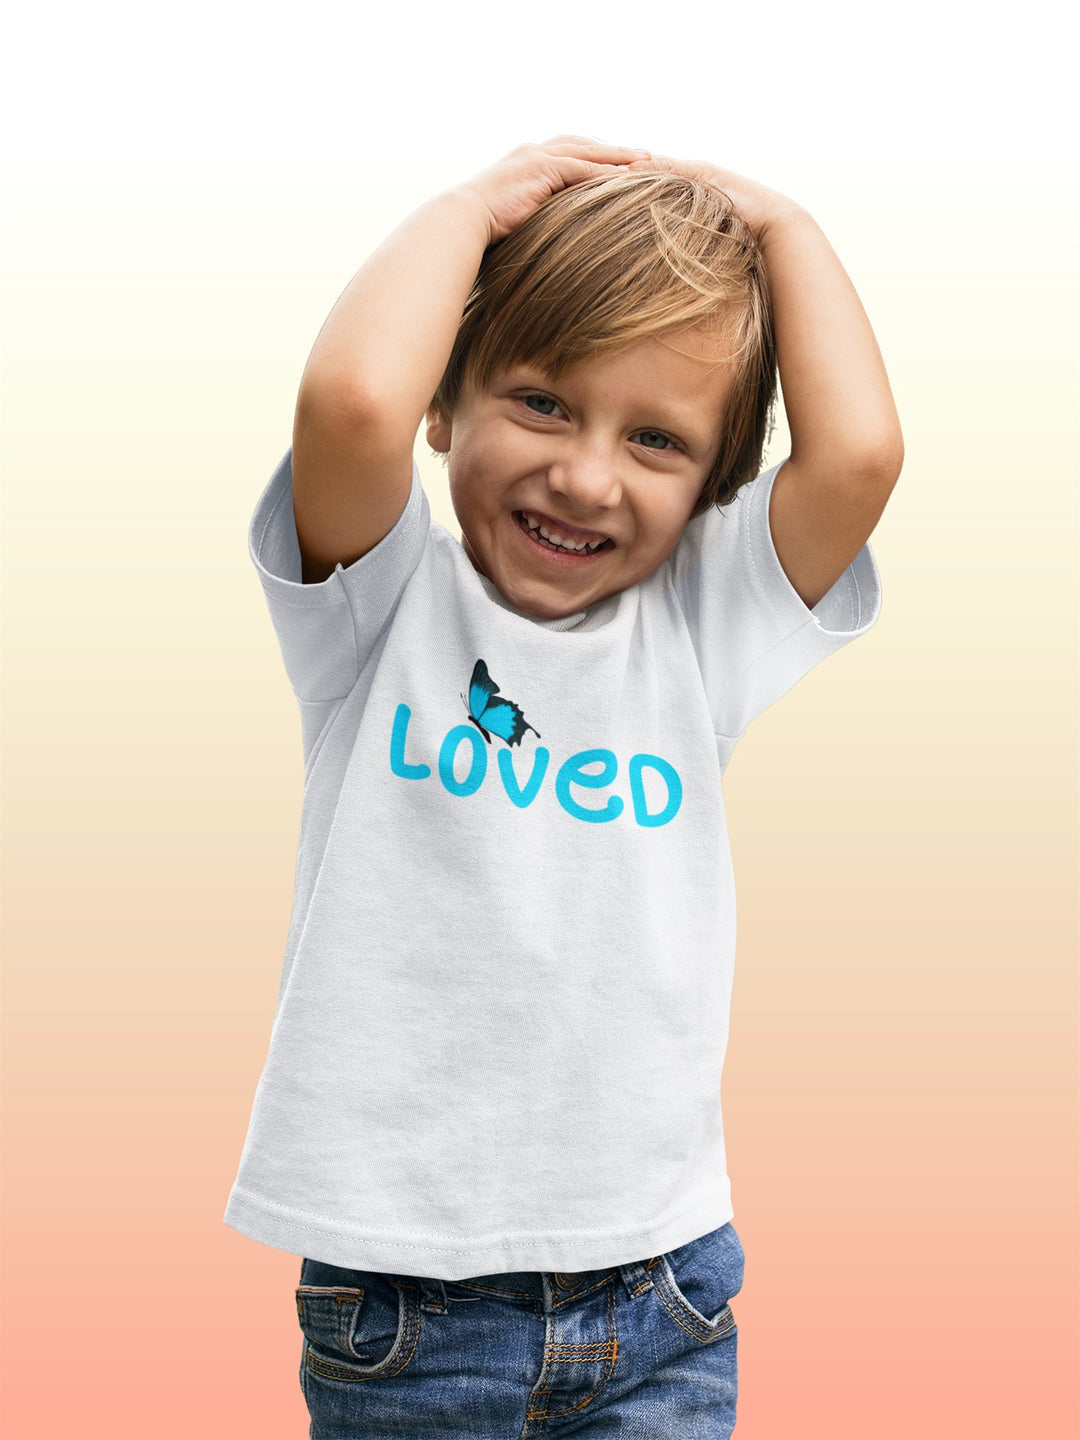 Loved With Blue Butterfly. Short Sleeve T Shirt For Toddler And Kids. - TeesForToddlersandKids -  t-shirt - holidays, Love - loved-with-blue-butterfly-short-sleeve-t-shirt-for-toddler-and-kids